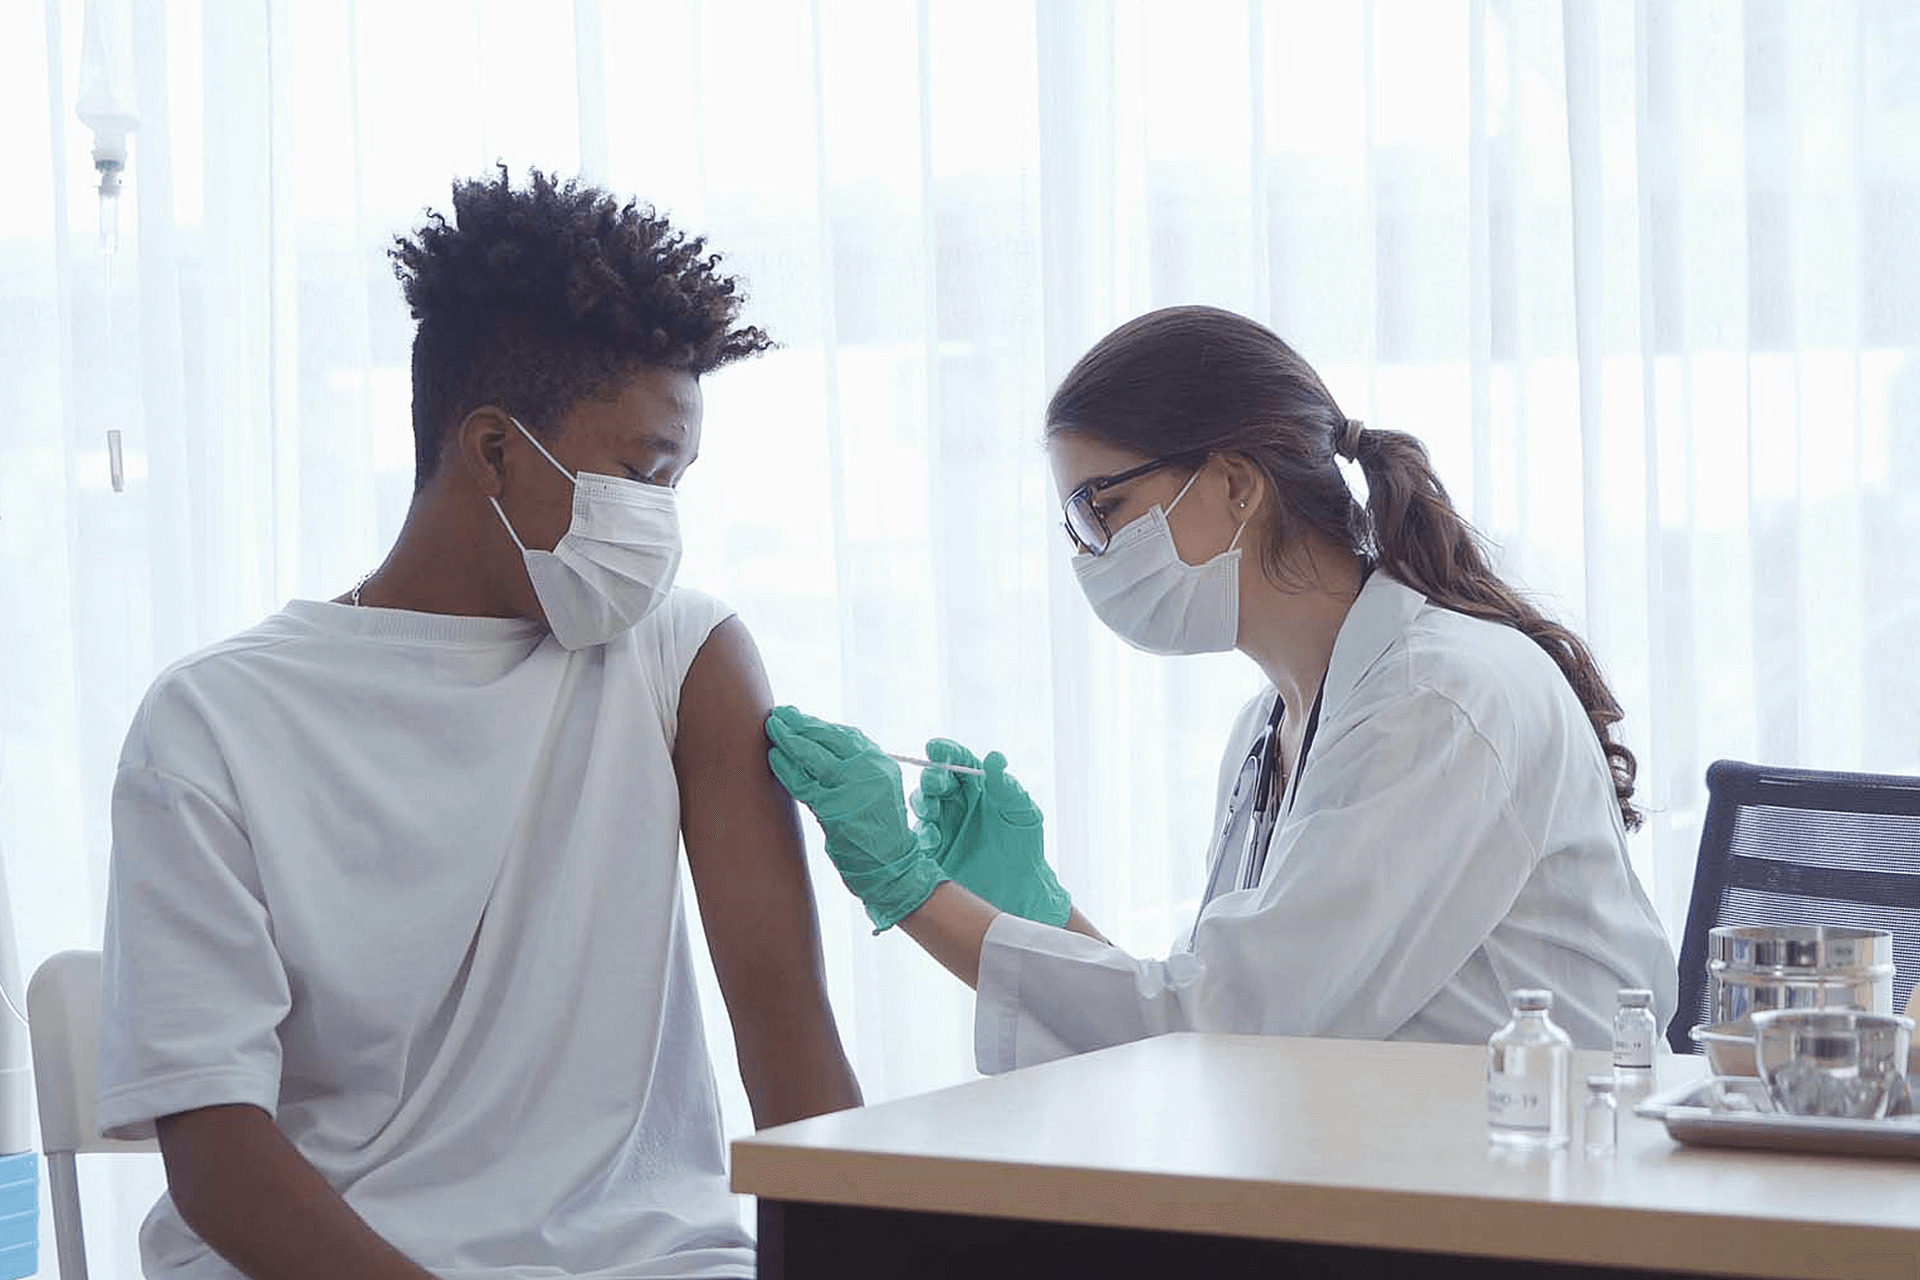 Medical professional wearing PPE, giving vaccine injection to patient